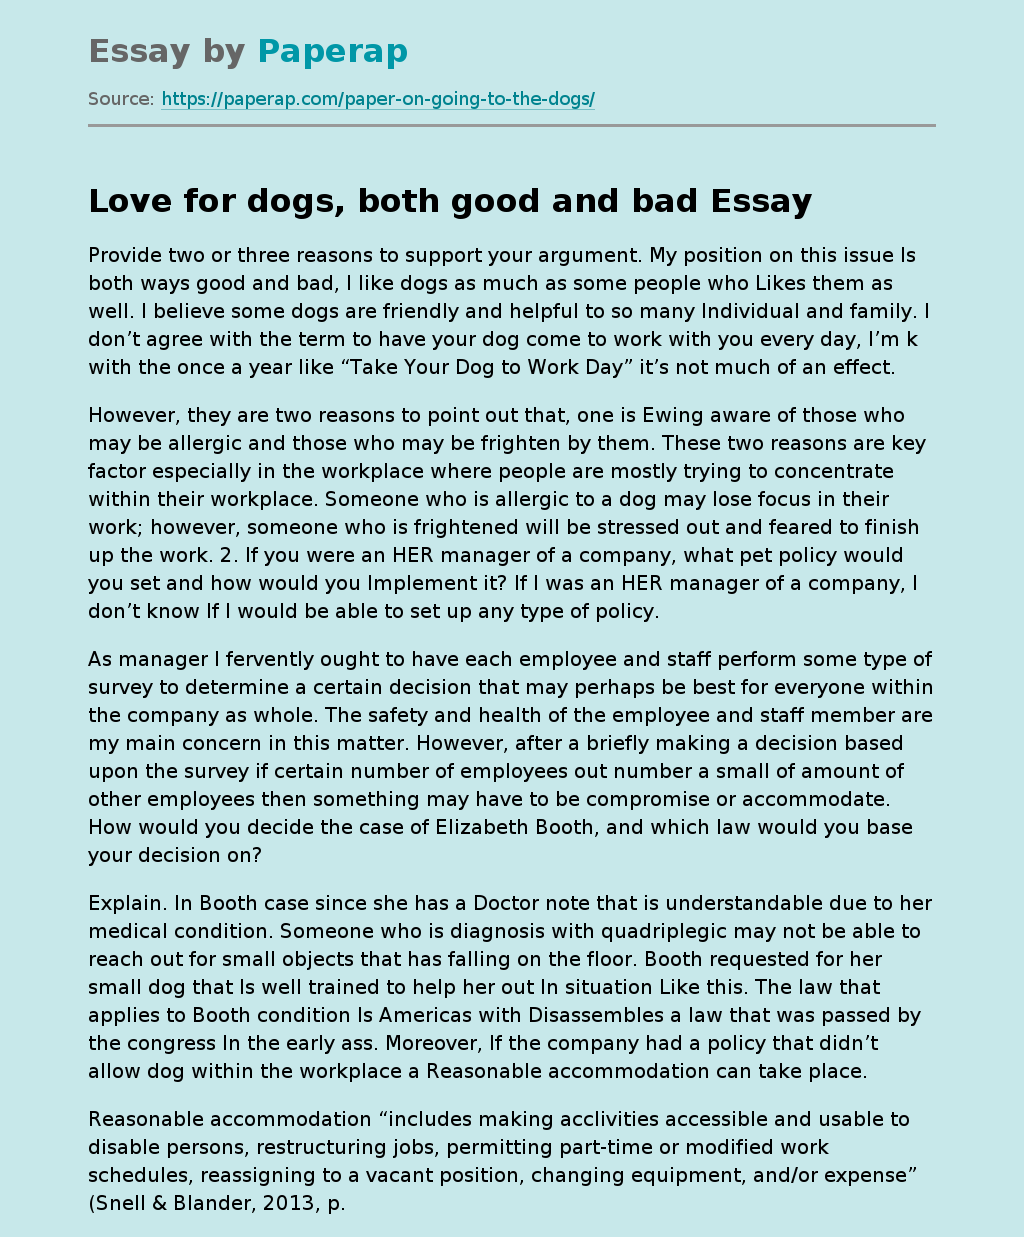 Love for dogs, both good and bad